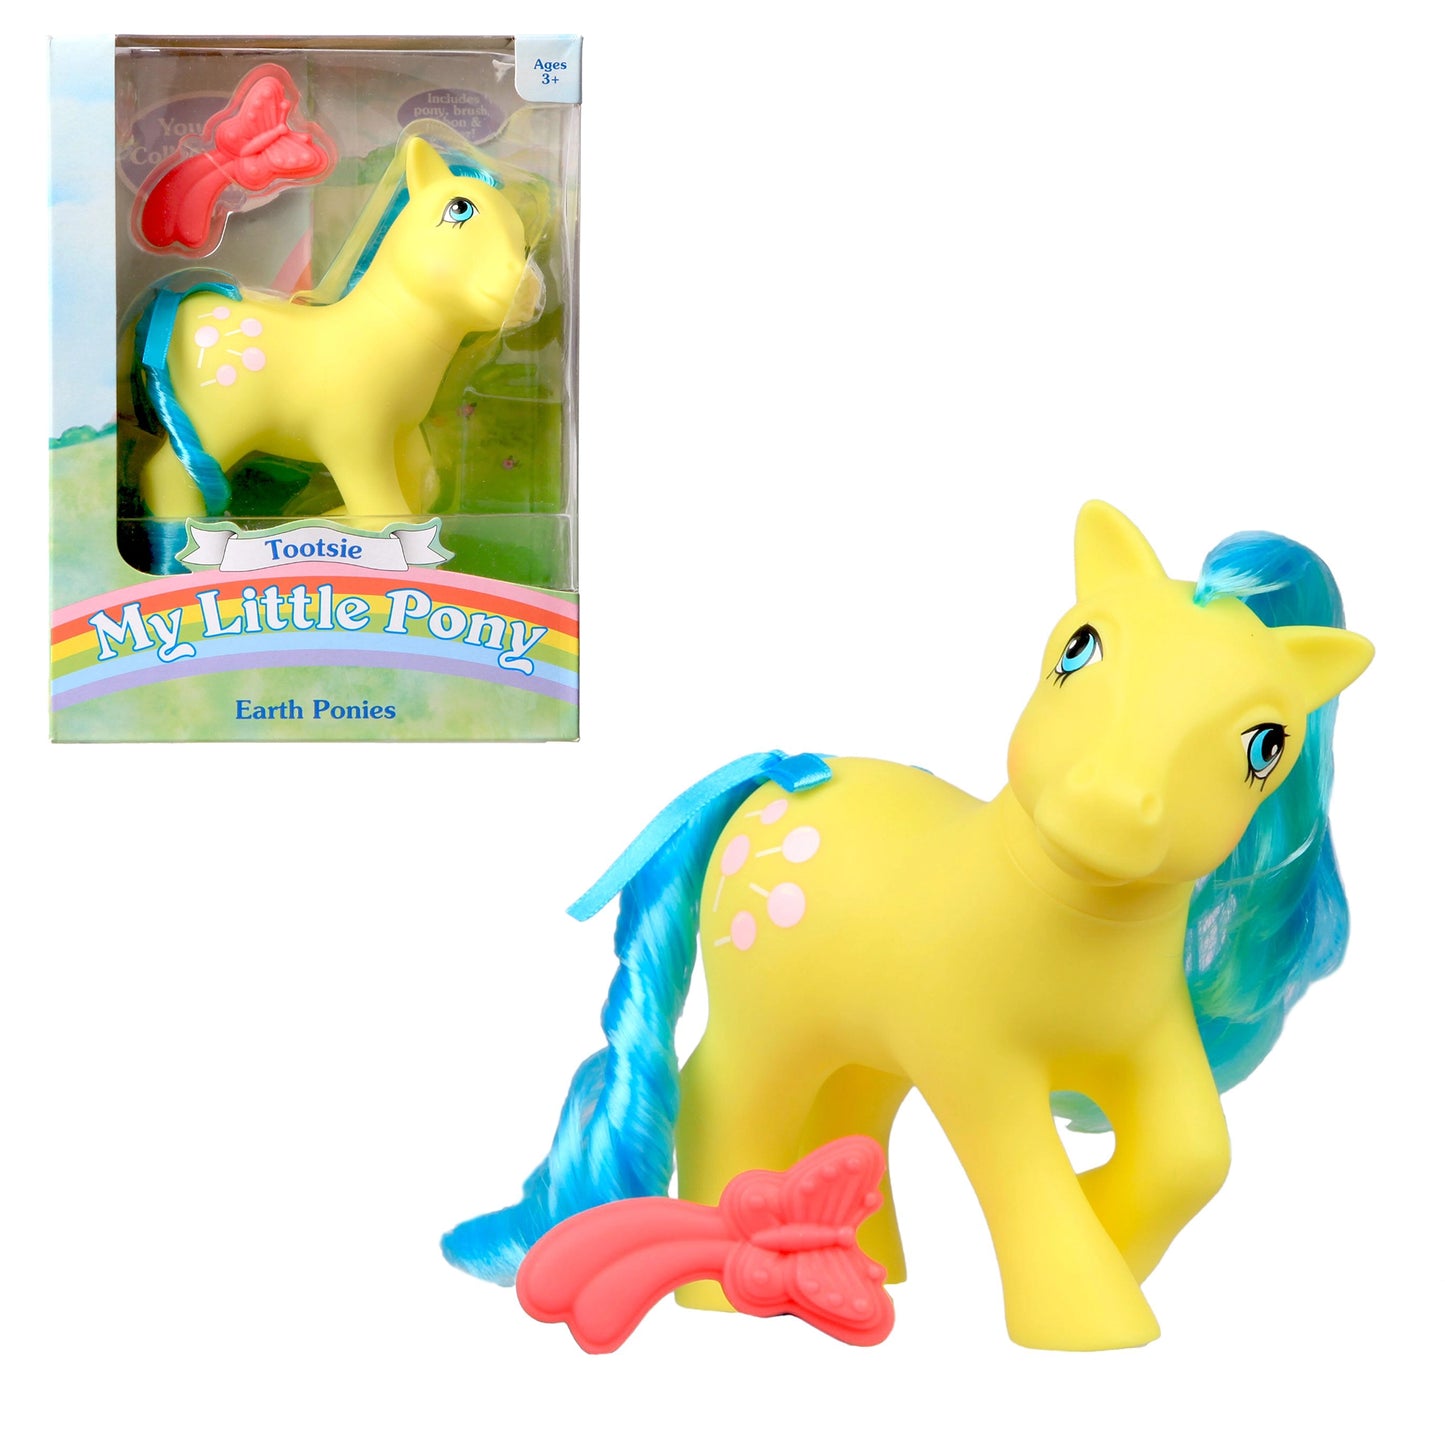 My Little Pony Classics - Tootsie - ABGee - The Forgotten Toy Shop